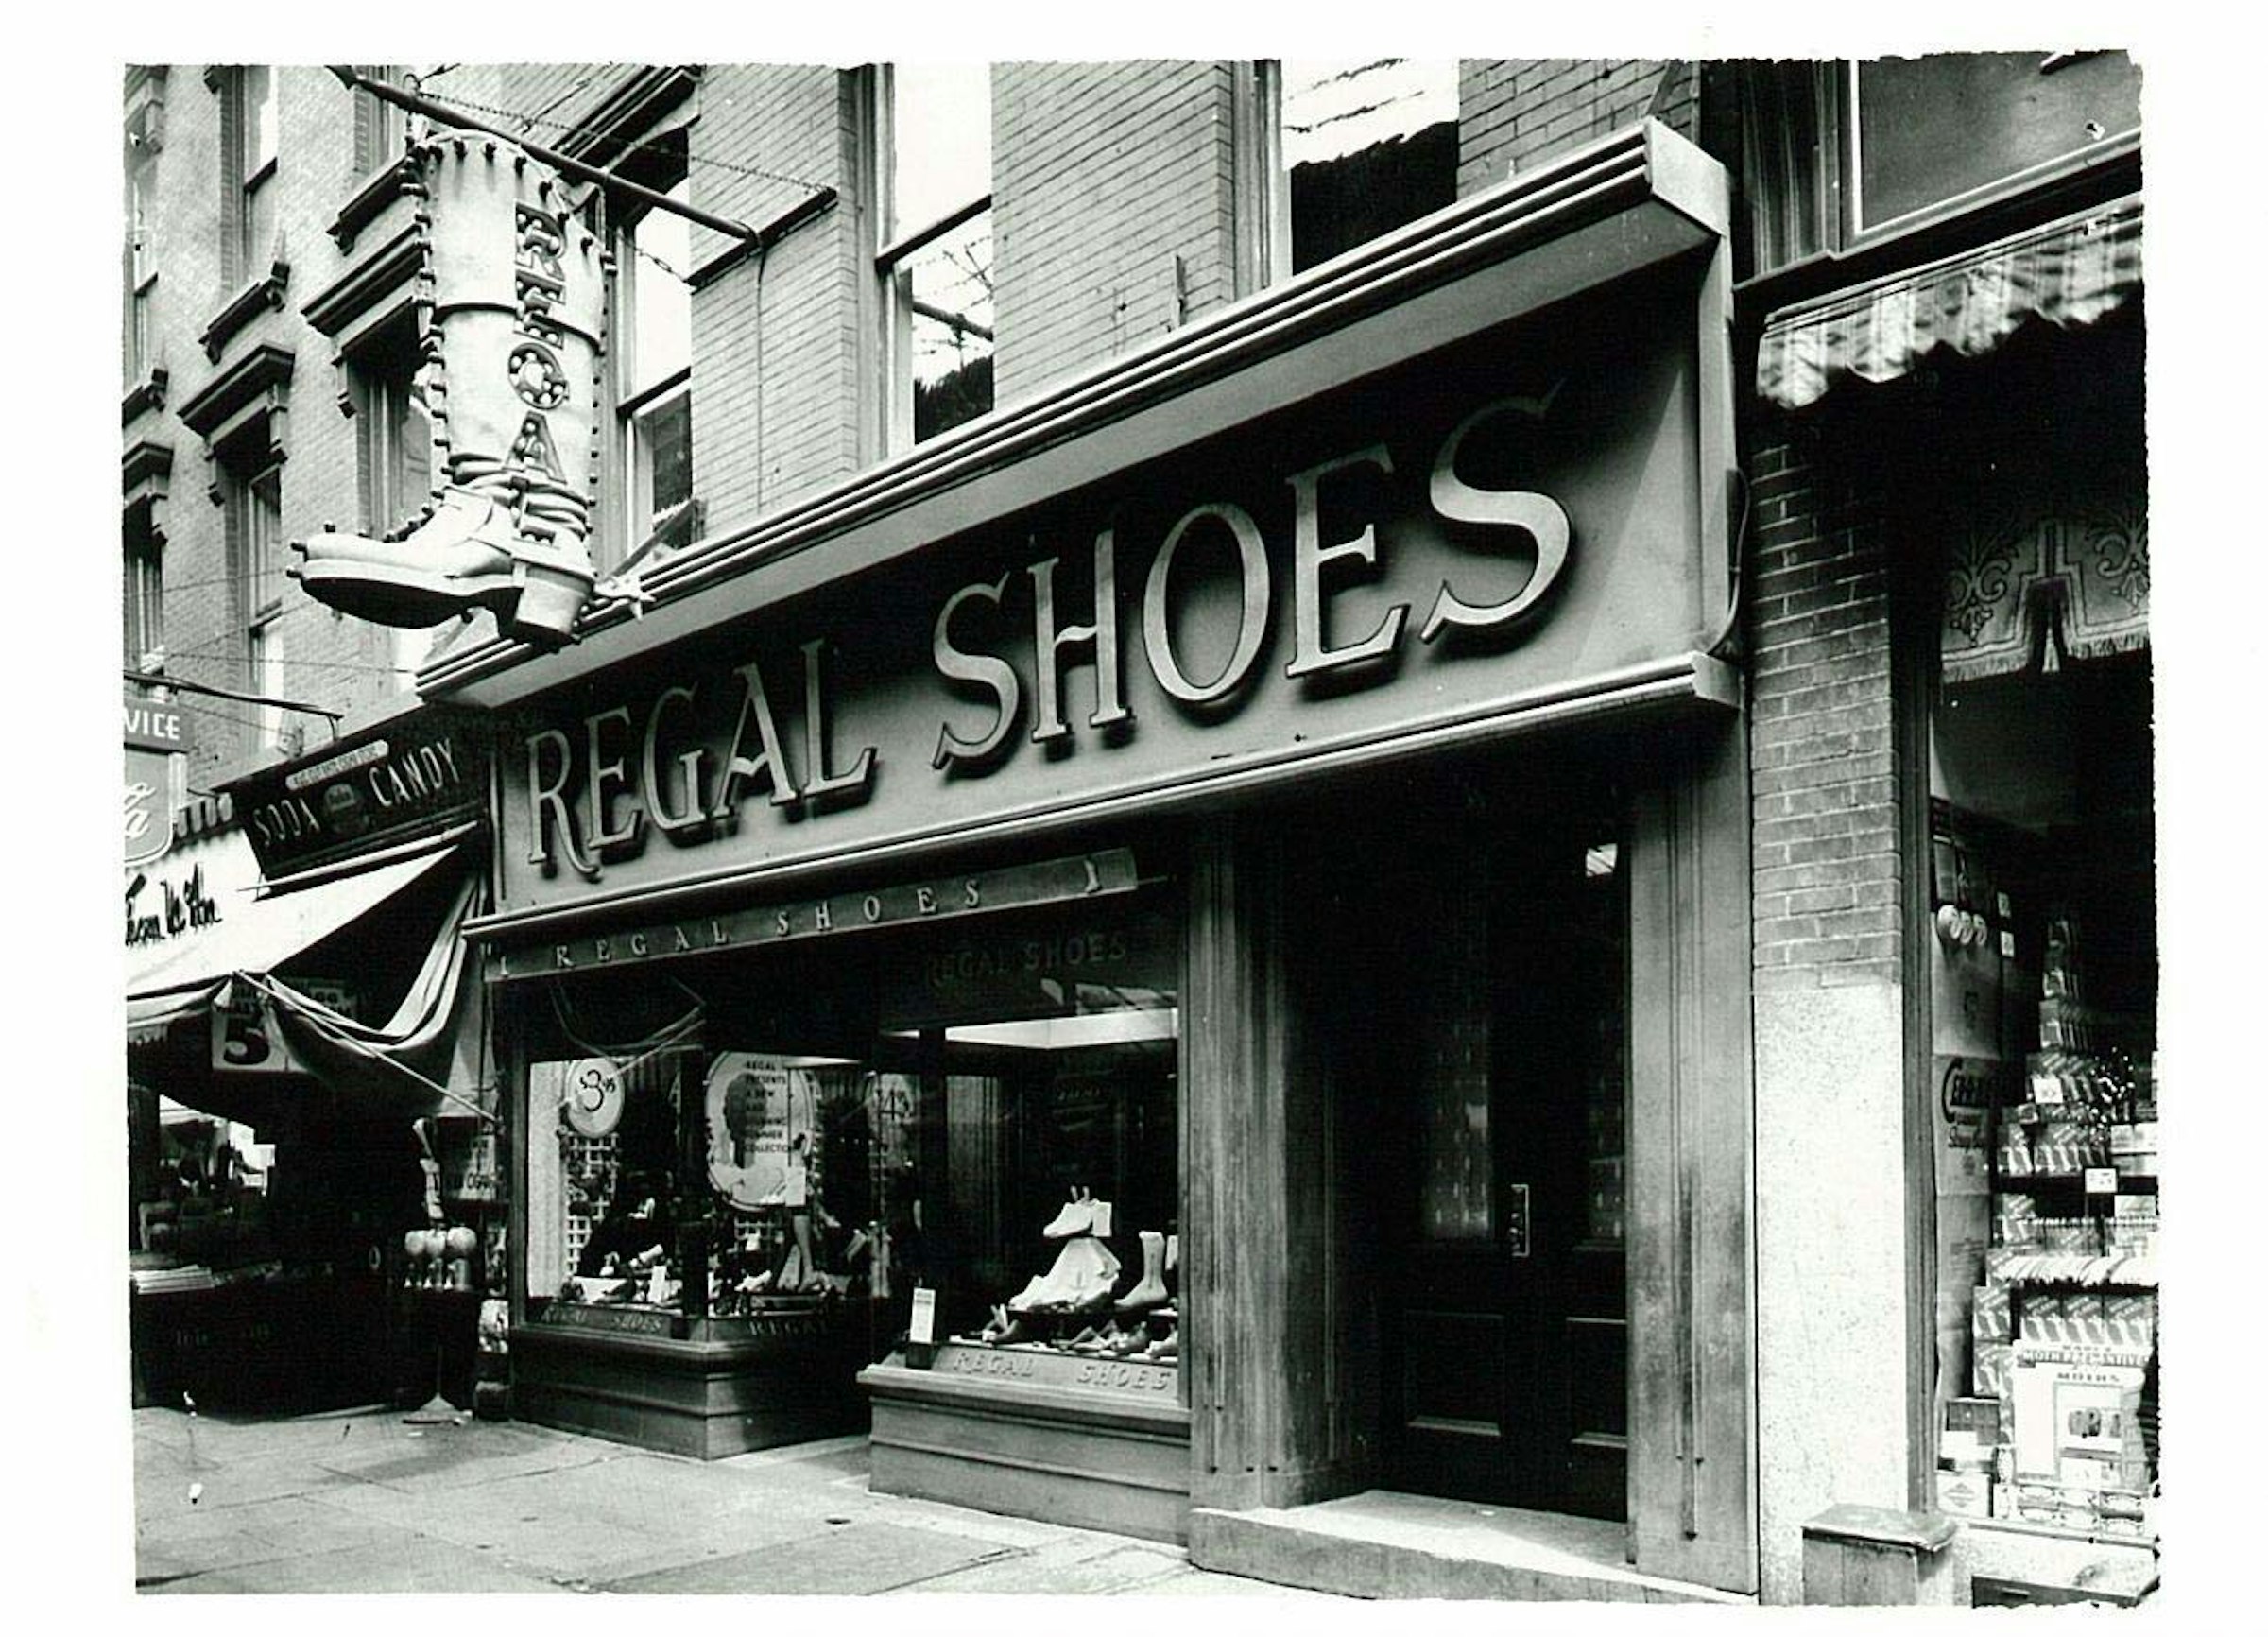 Regal's store in America with a large boots sign as trade mark